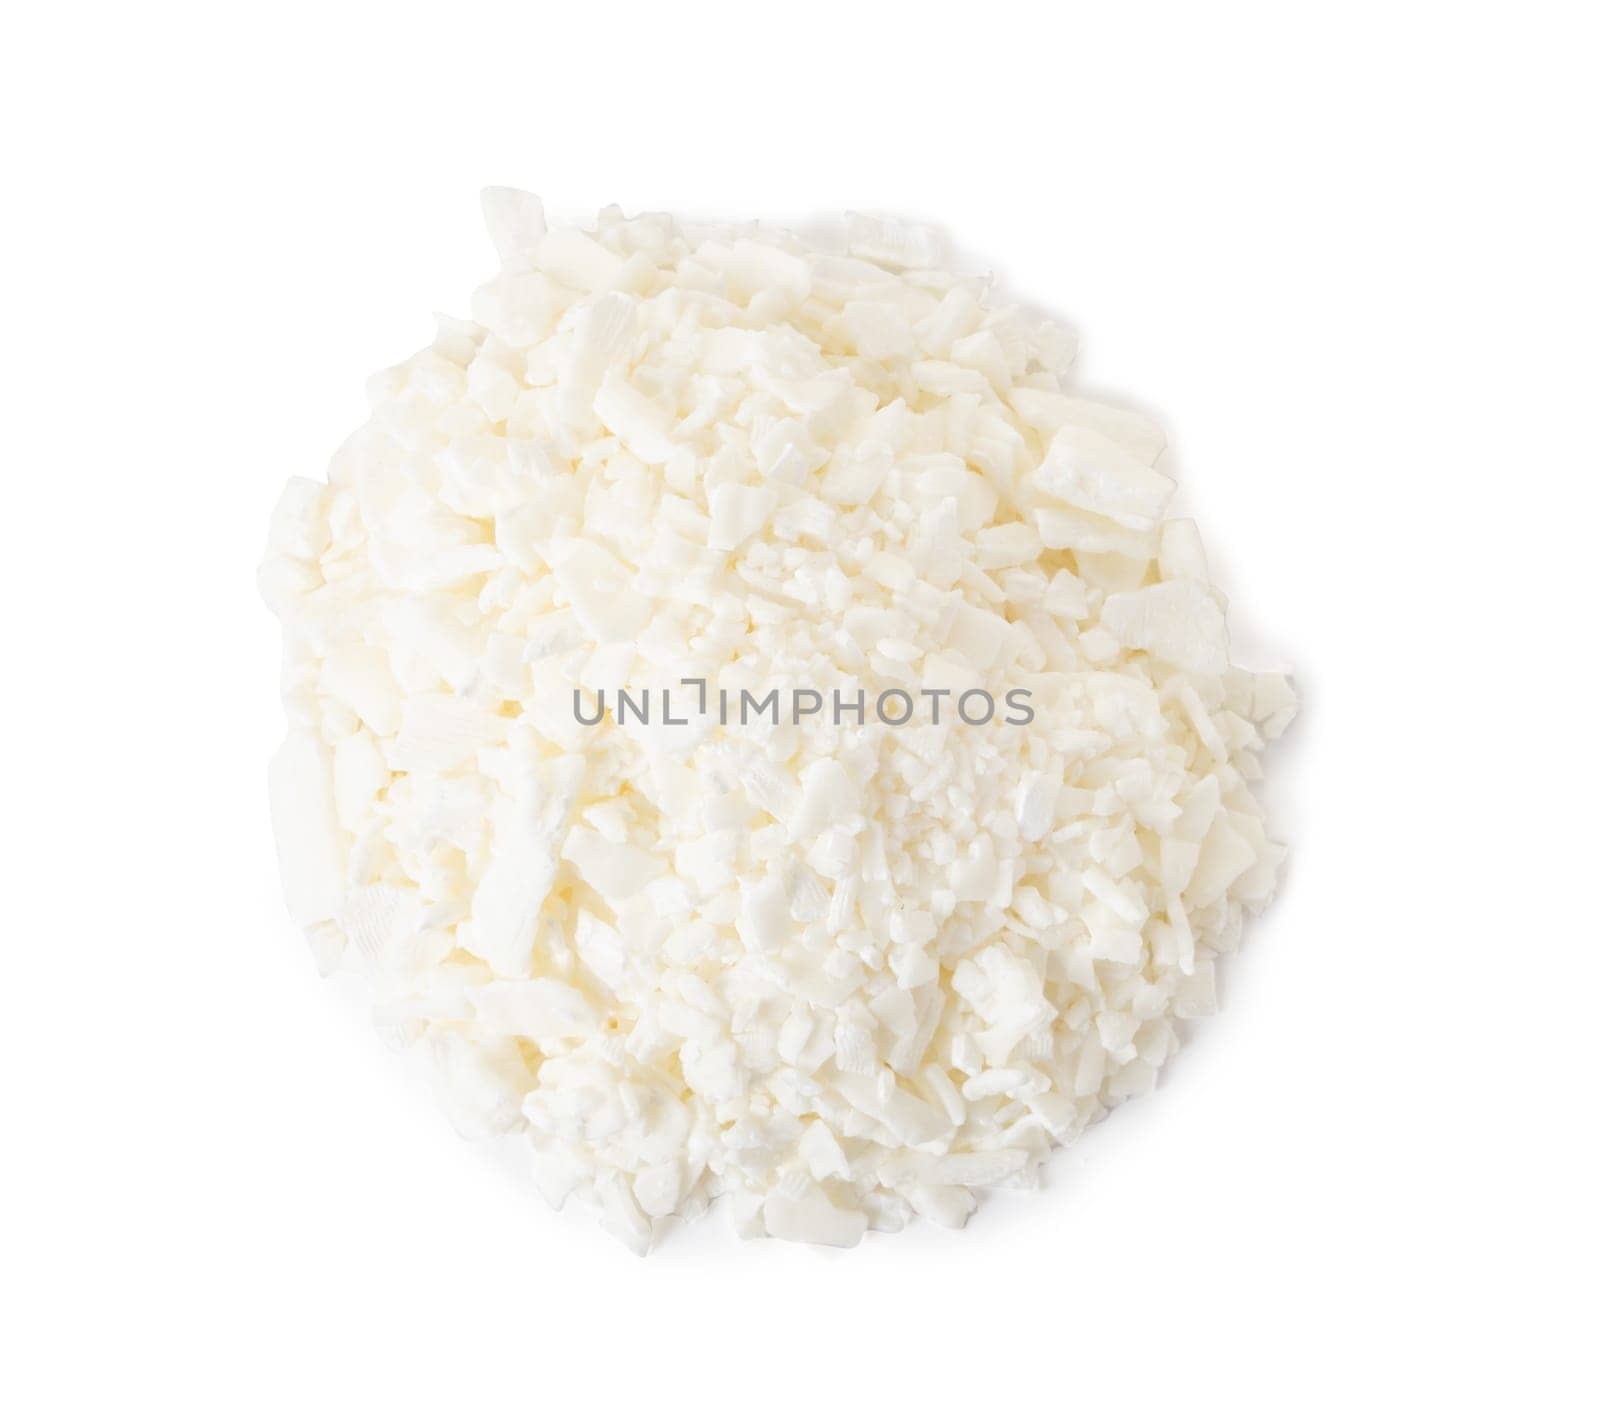 Pile of organic white soy wax flakes for candles isolated on white background with shadow